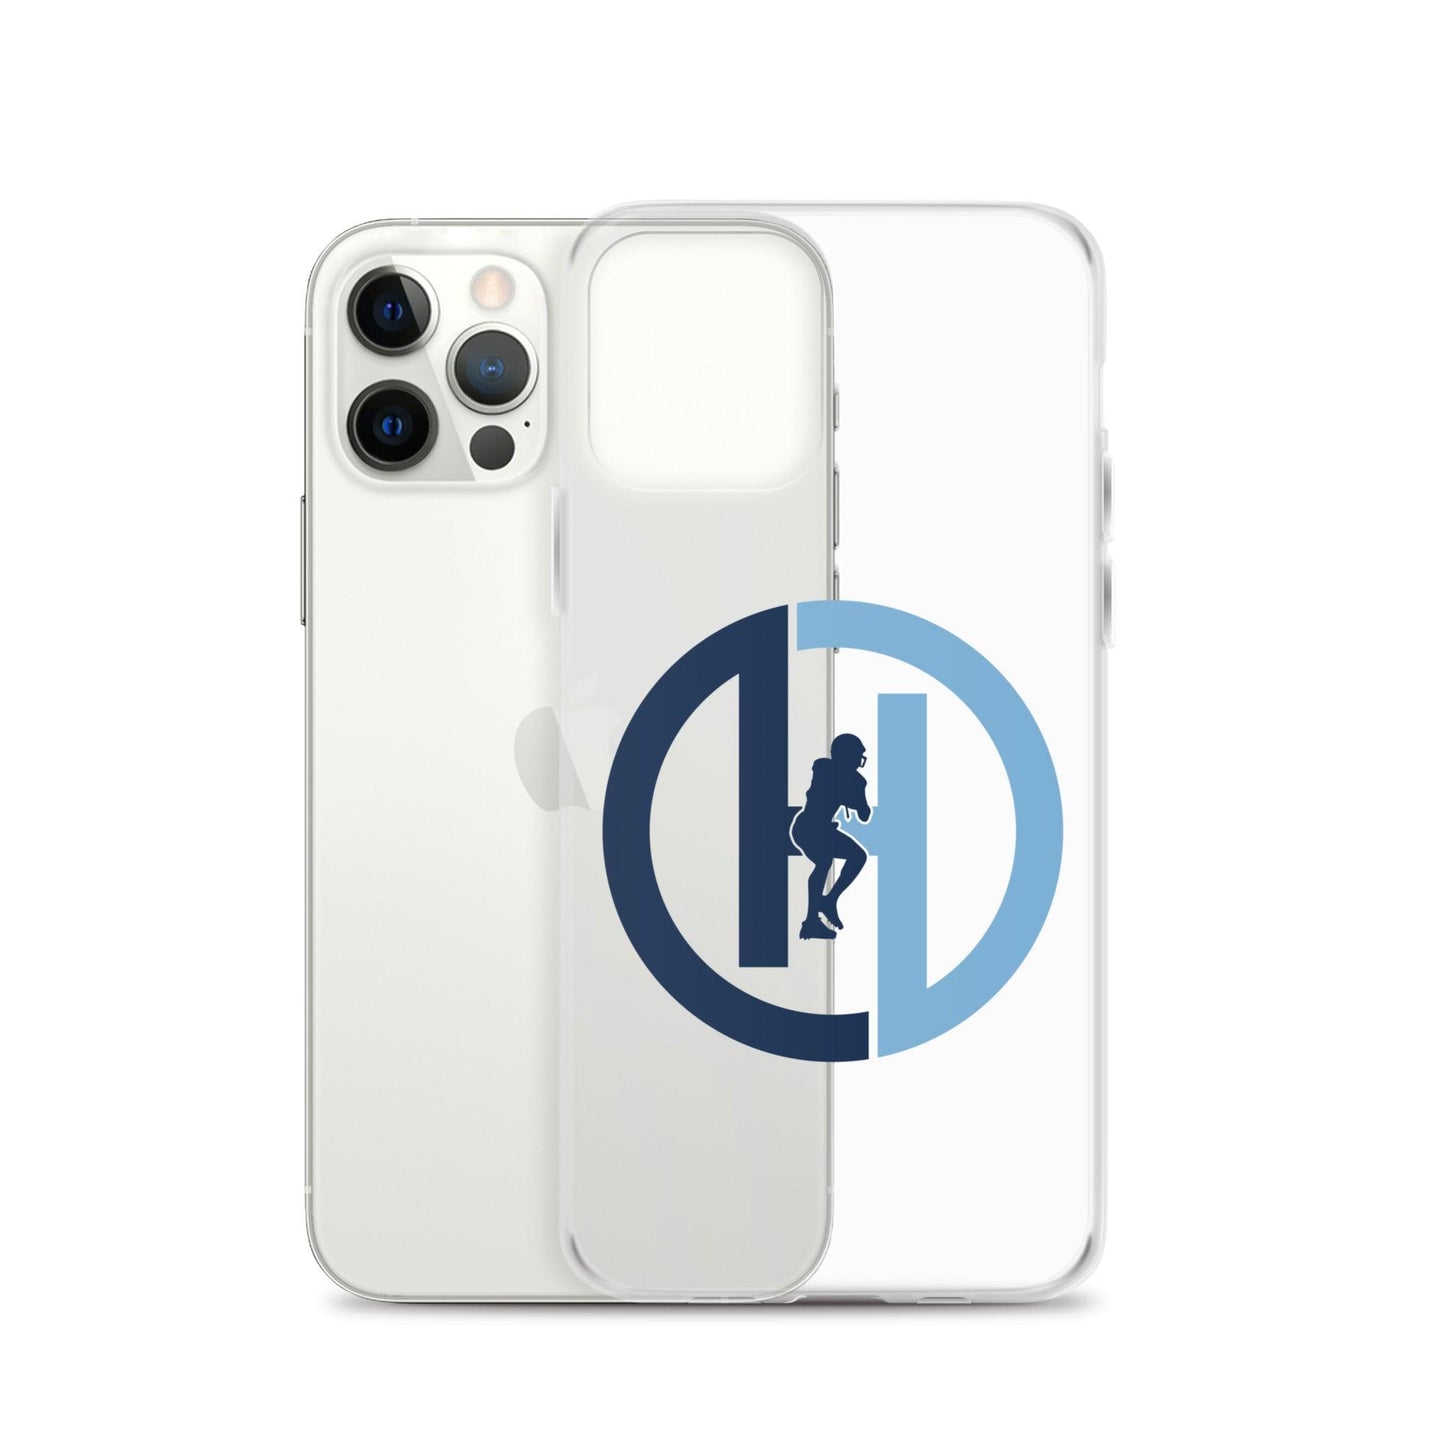 Omarion Hampton "The Brand" iPhone Case - Fan Arch